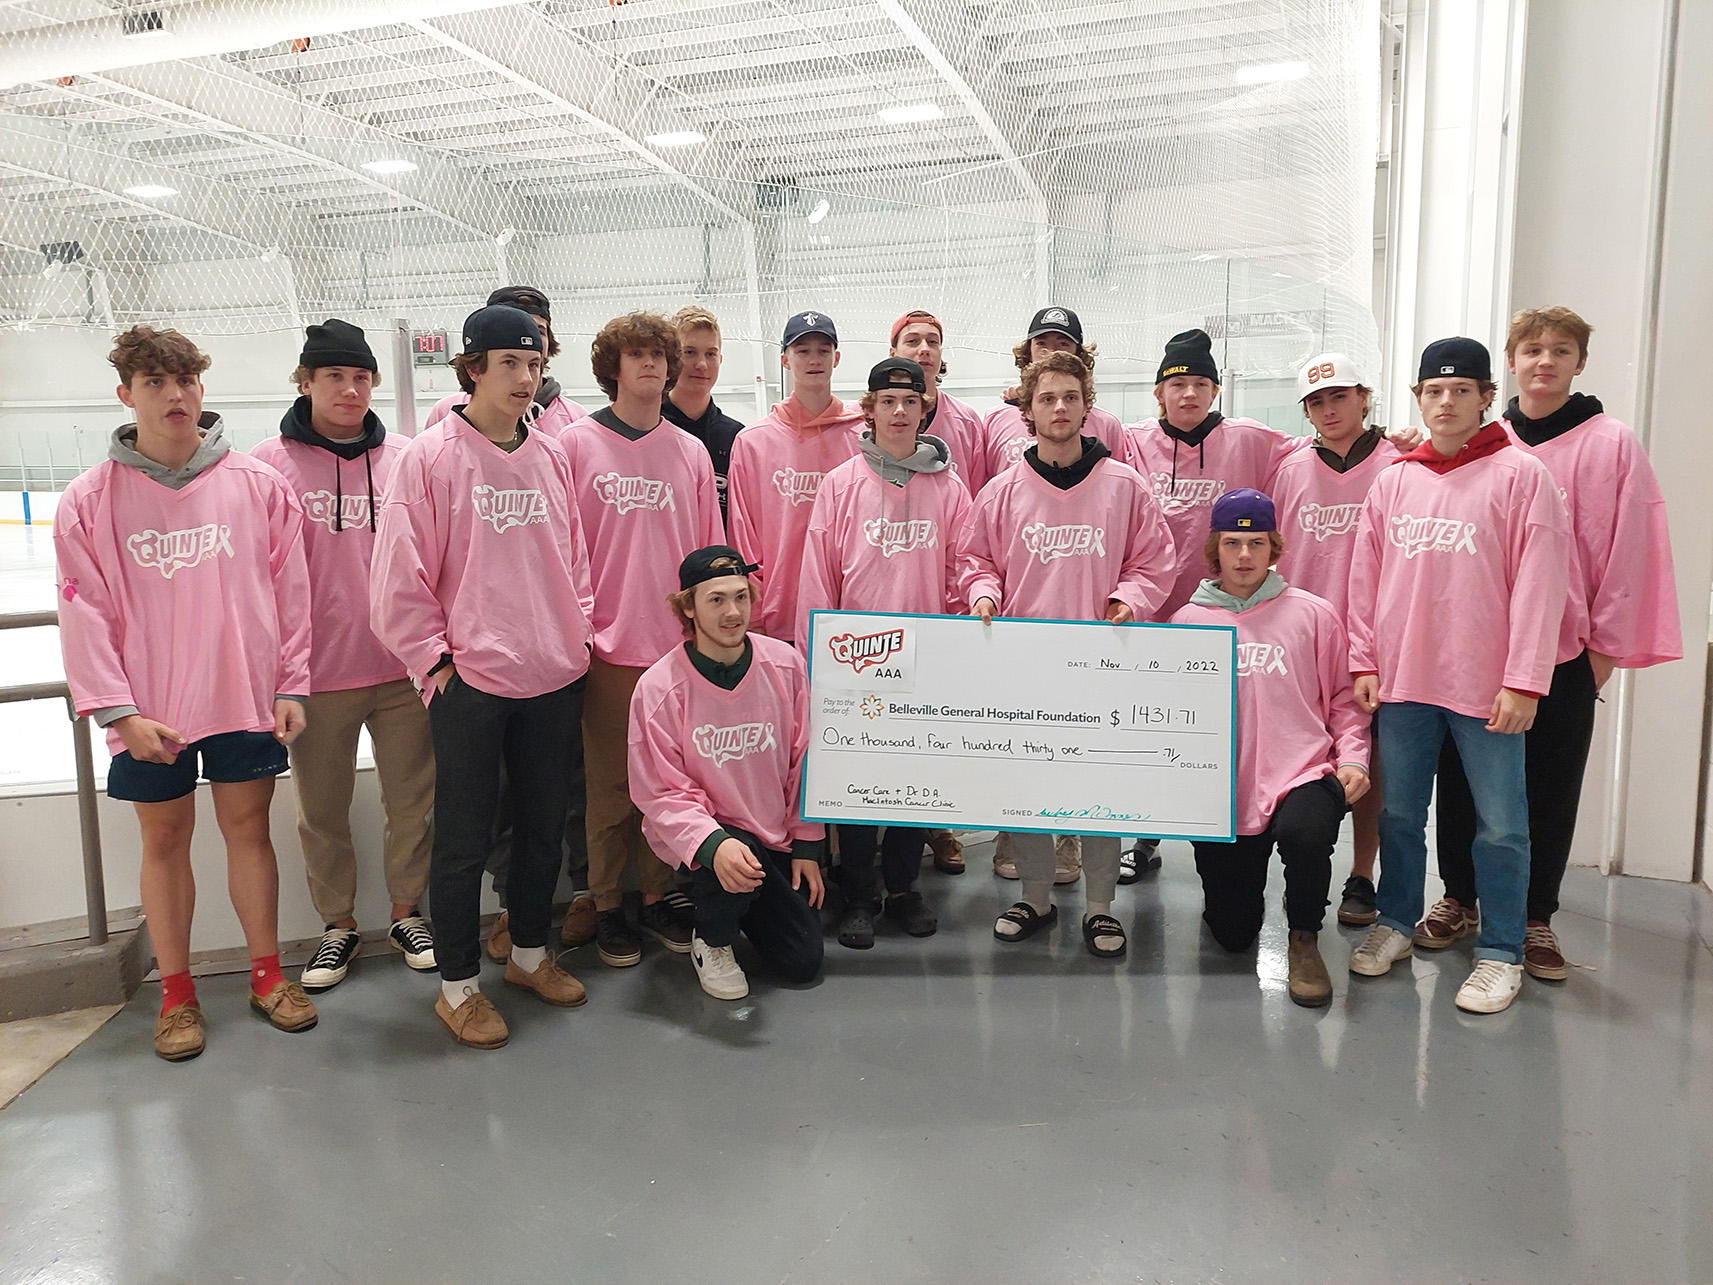 Quinte Red Devils AAA team wearing their pink hockey jerseys